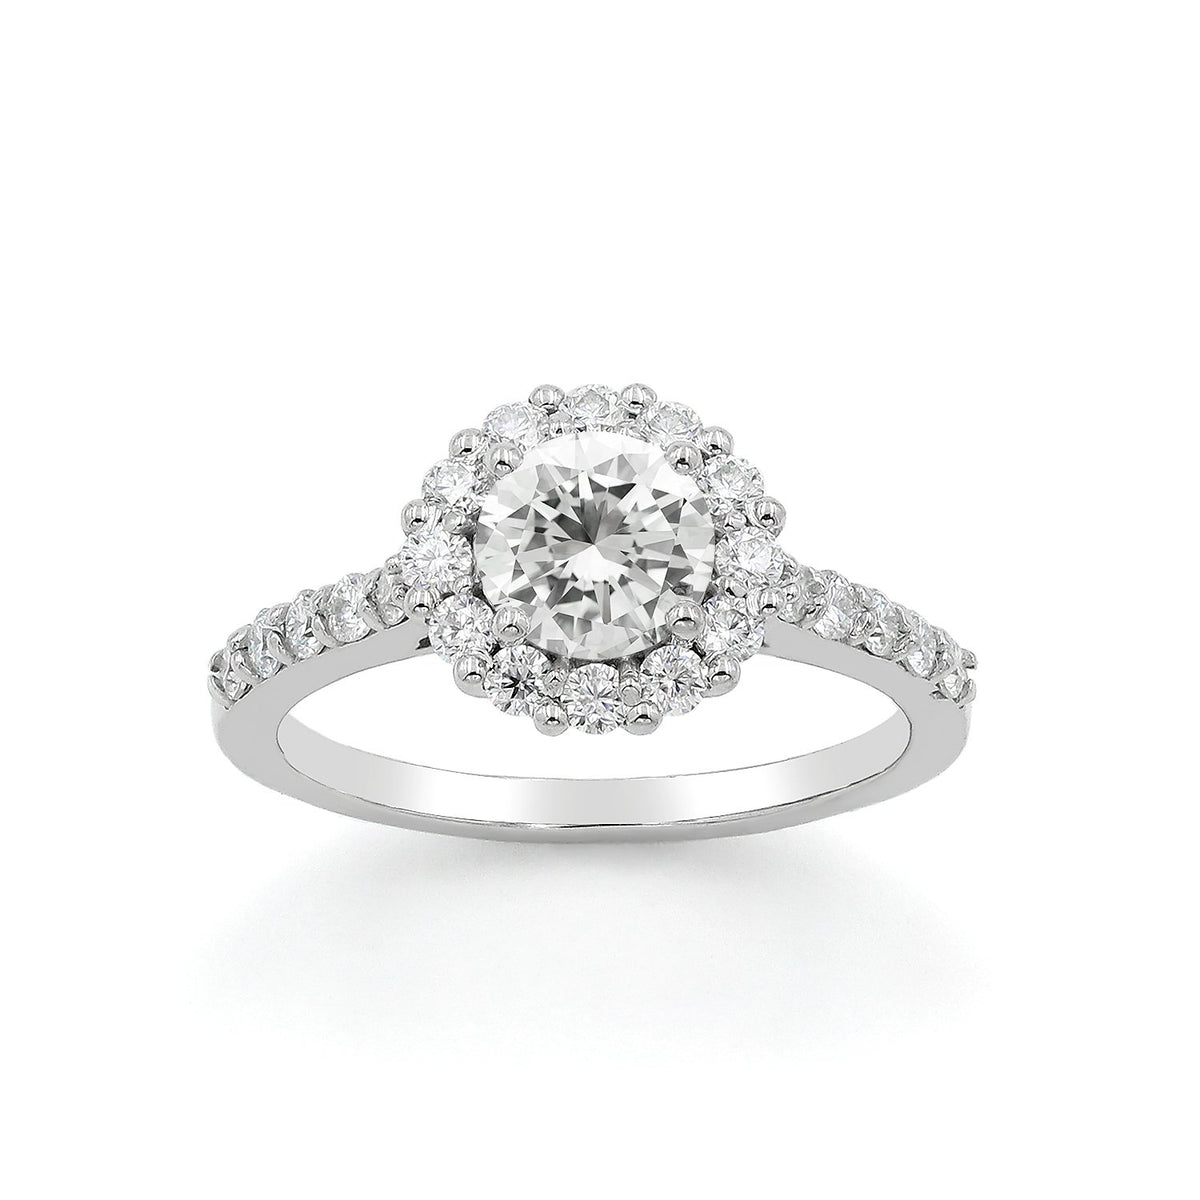 1.60 CTTW Moissanite Round Halo Engagement Ring in 925 Sterling Silver